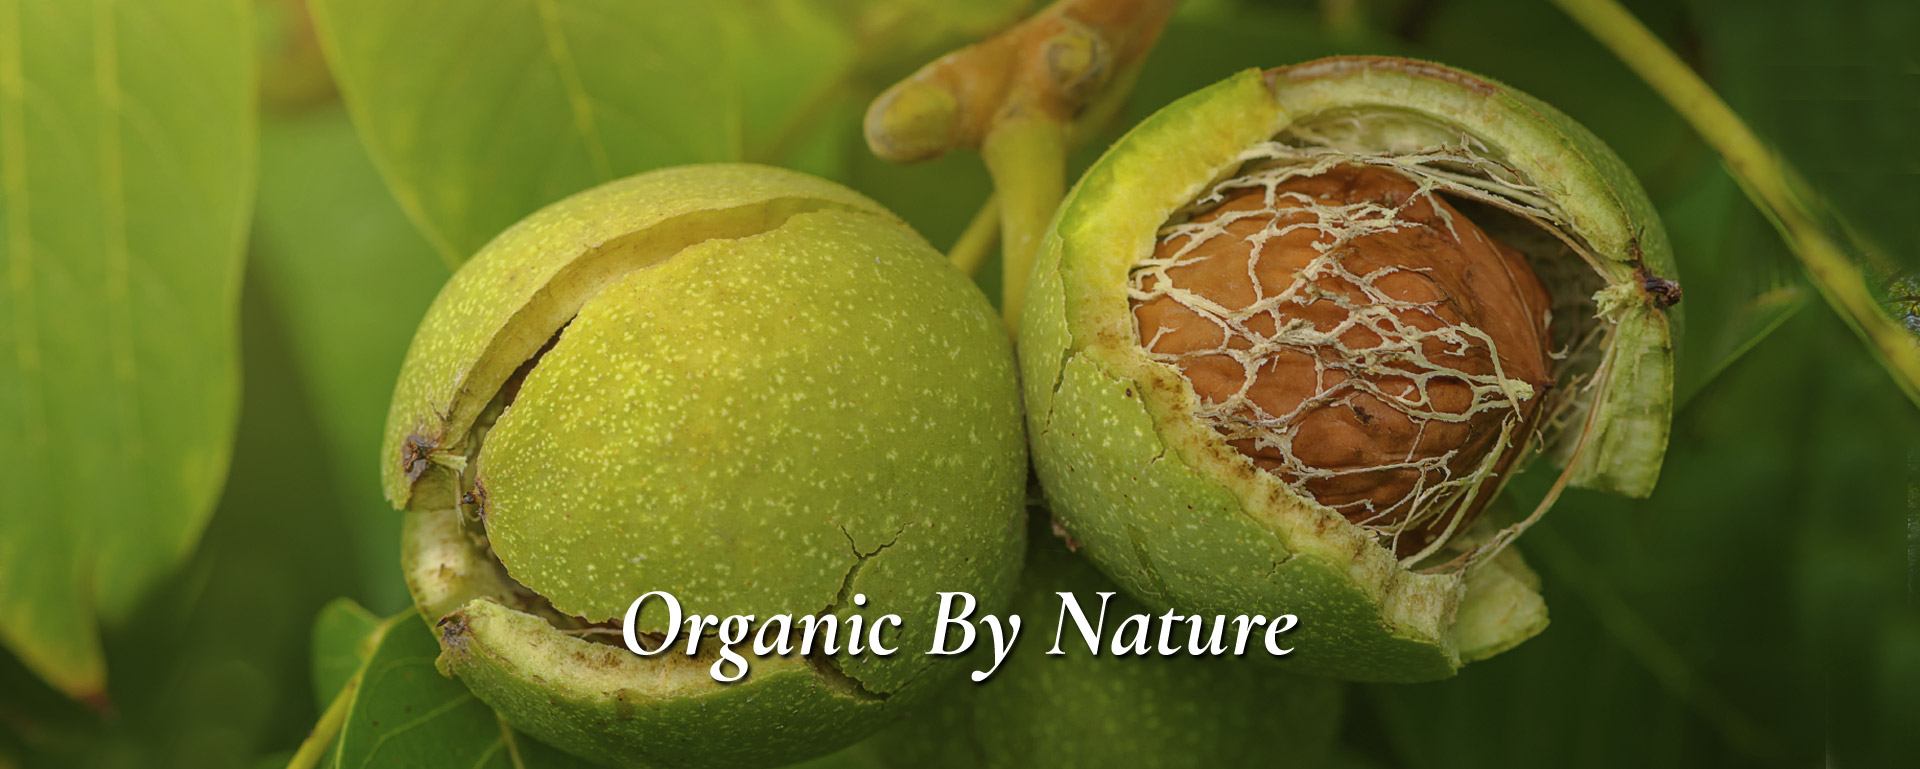 Free from any sort of chemicals and naturally grown, Organic Kashmiri walnuts